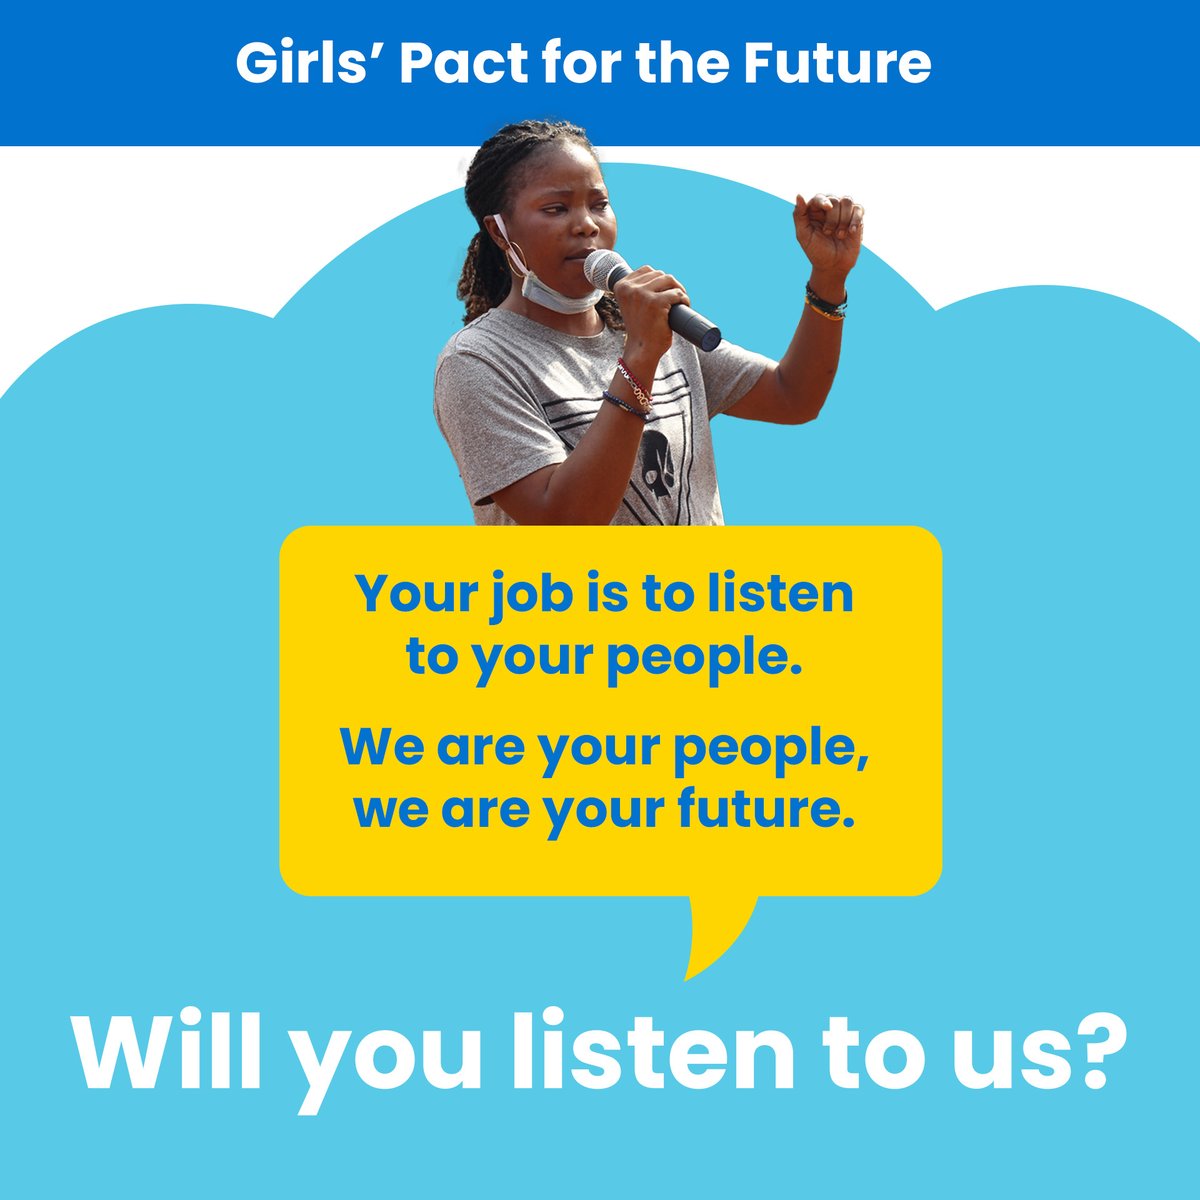 In the Girls’ Pact for the future, young people are setting out their vision for a world where #GenderEquality is a reality and where everyone is fully accepted and equal in society, no longer defined by the constraints of their gender.